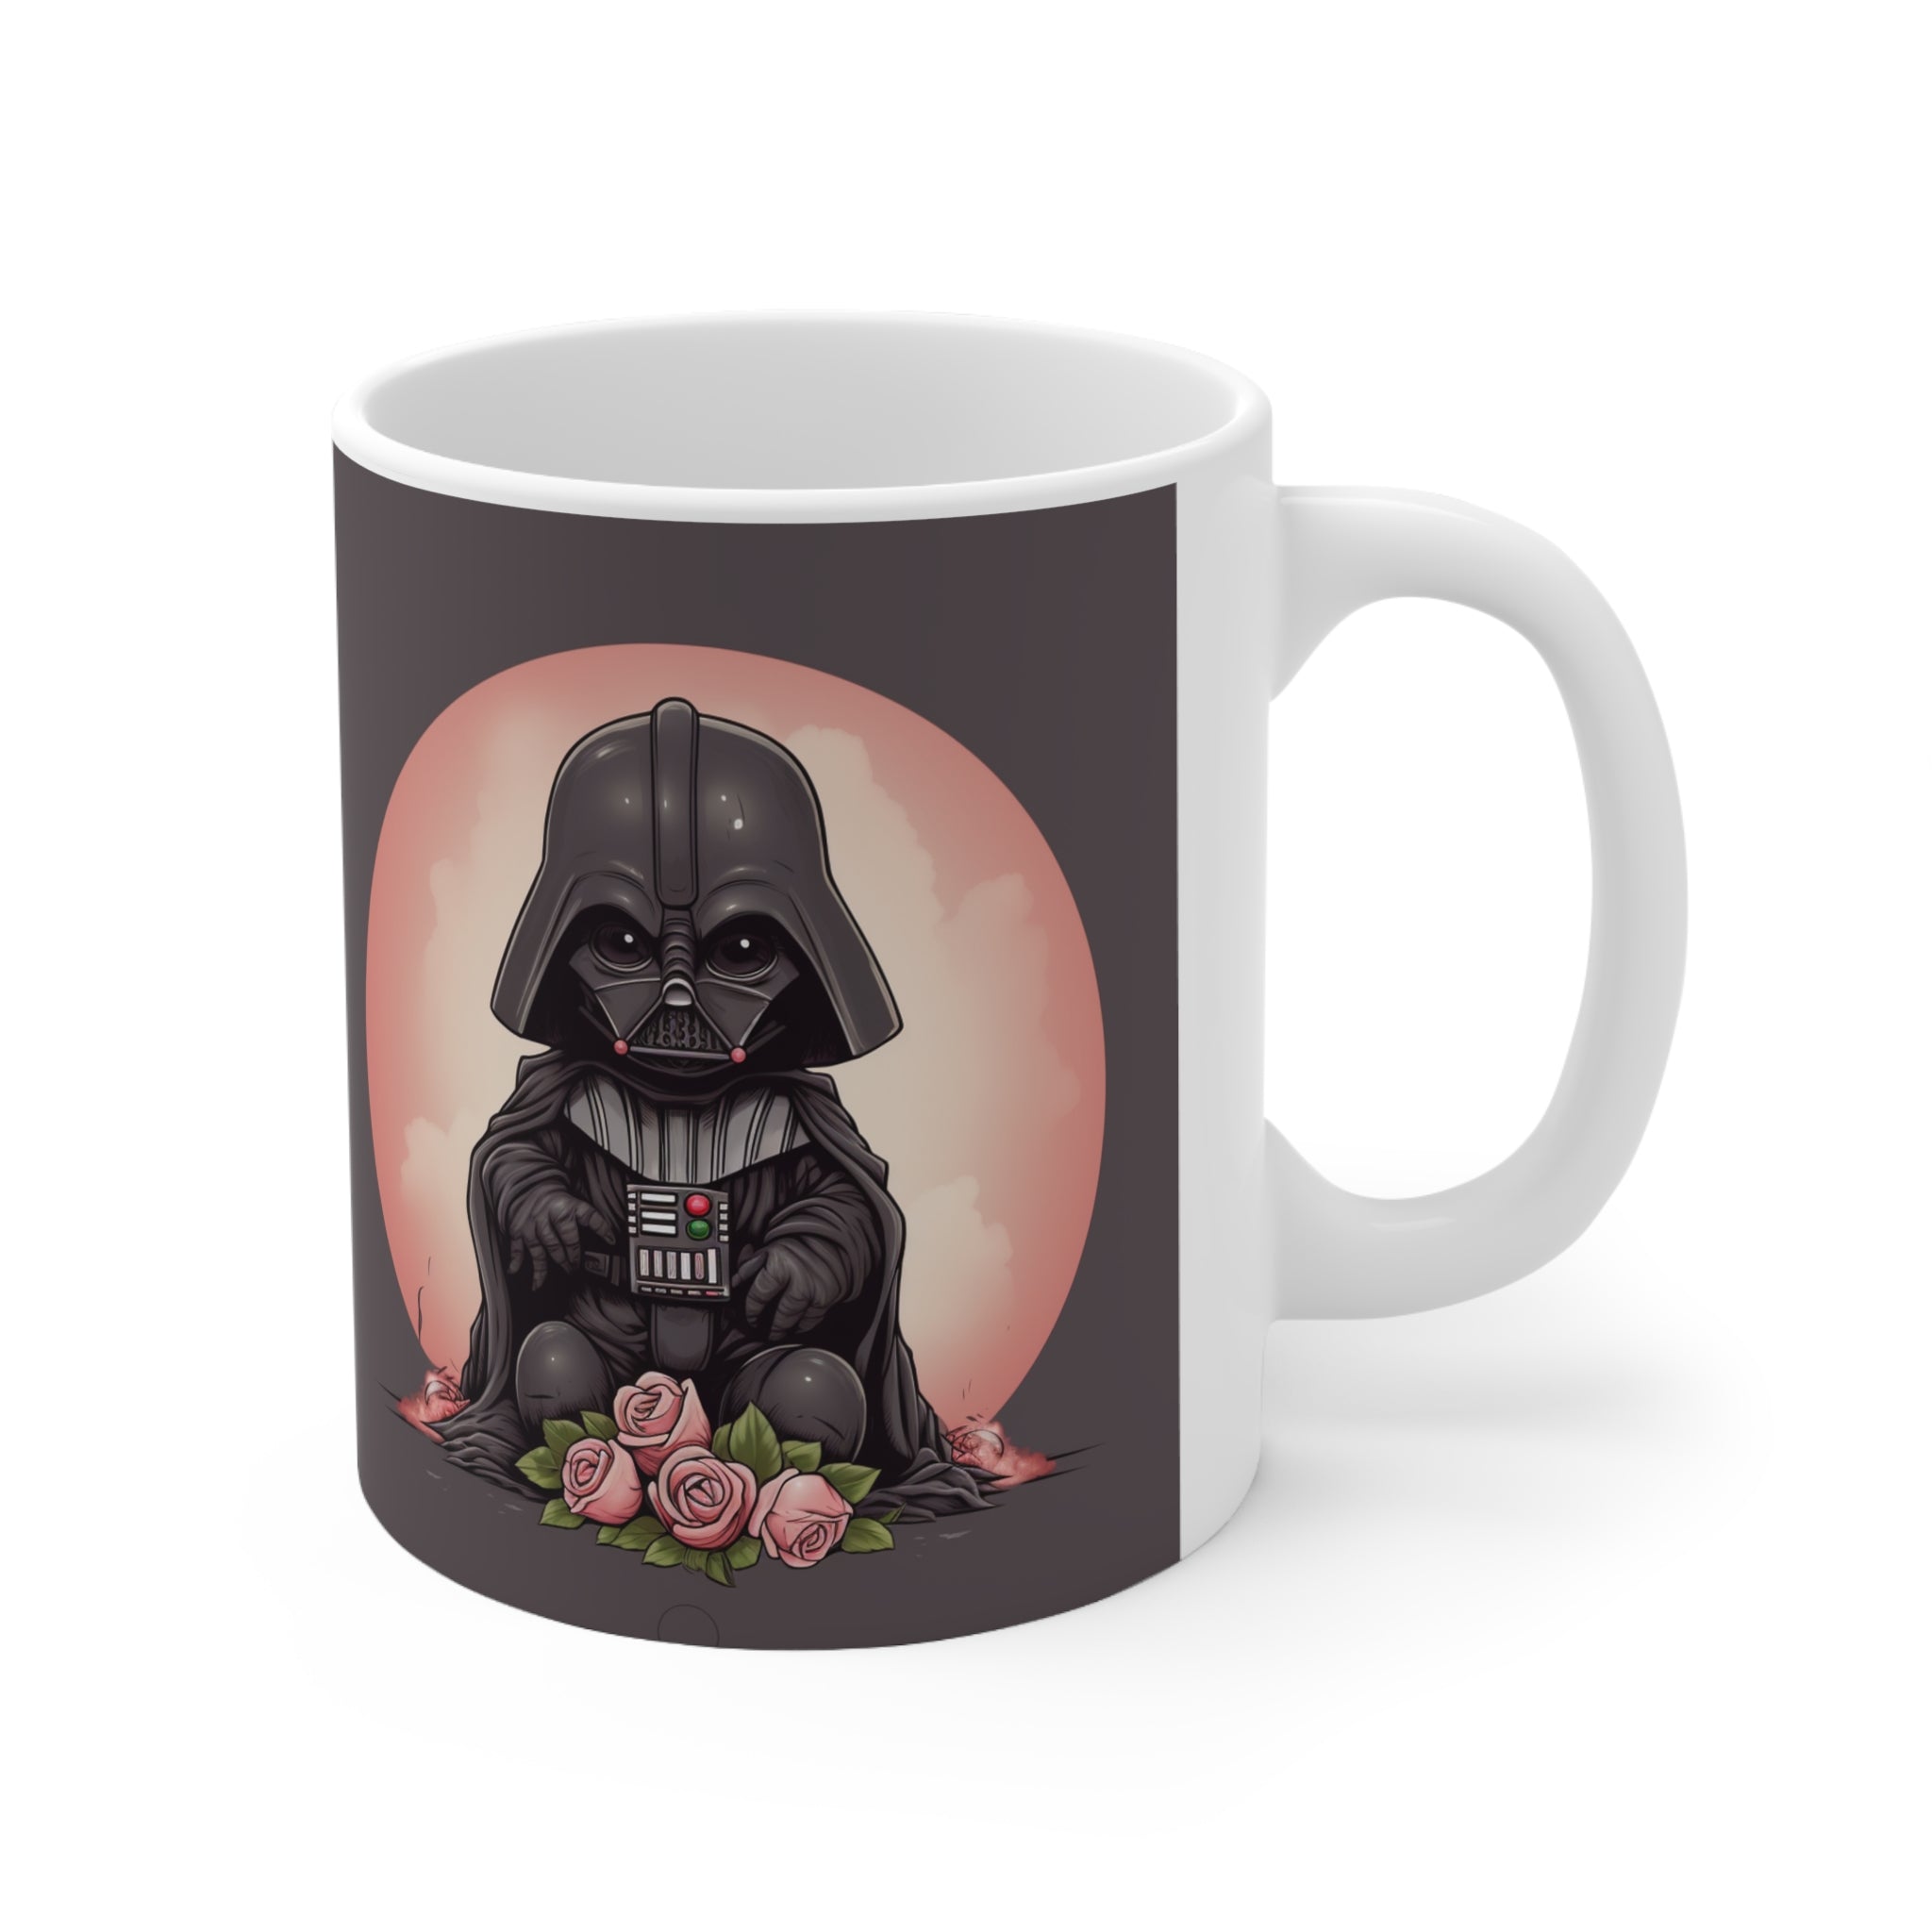 Proven Conversation Starter! Add to Your Collection to Bring it All Together. Classic Galaxy Villain Romantic Cupid Ceramic Mug 11oz - Unique Gift for the One You Love or Ideal Gift for Friends and Family